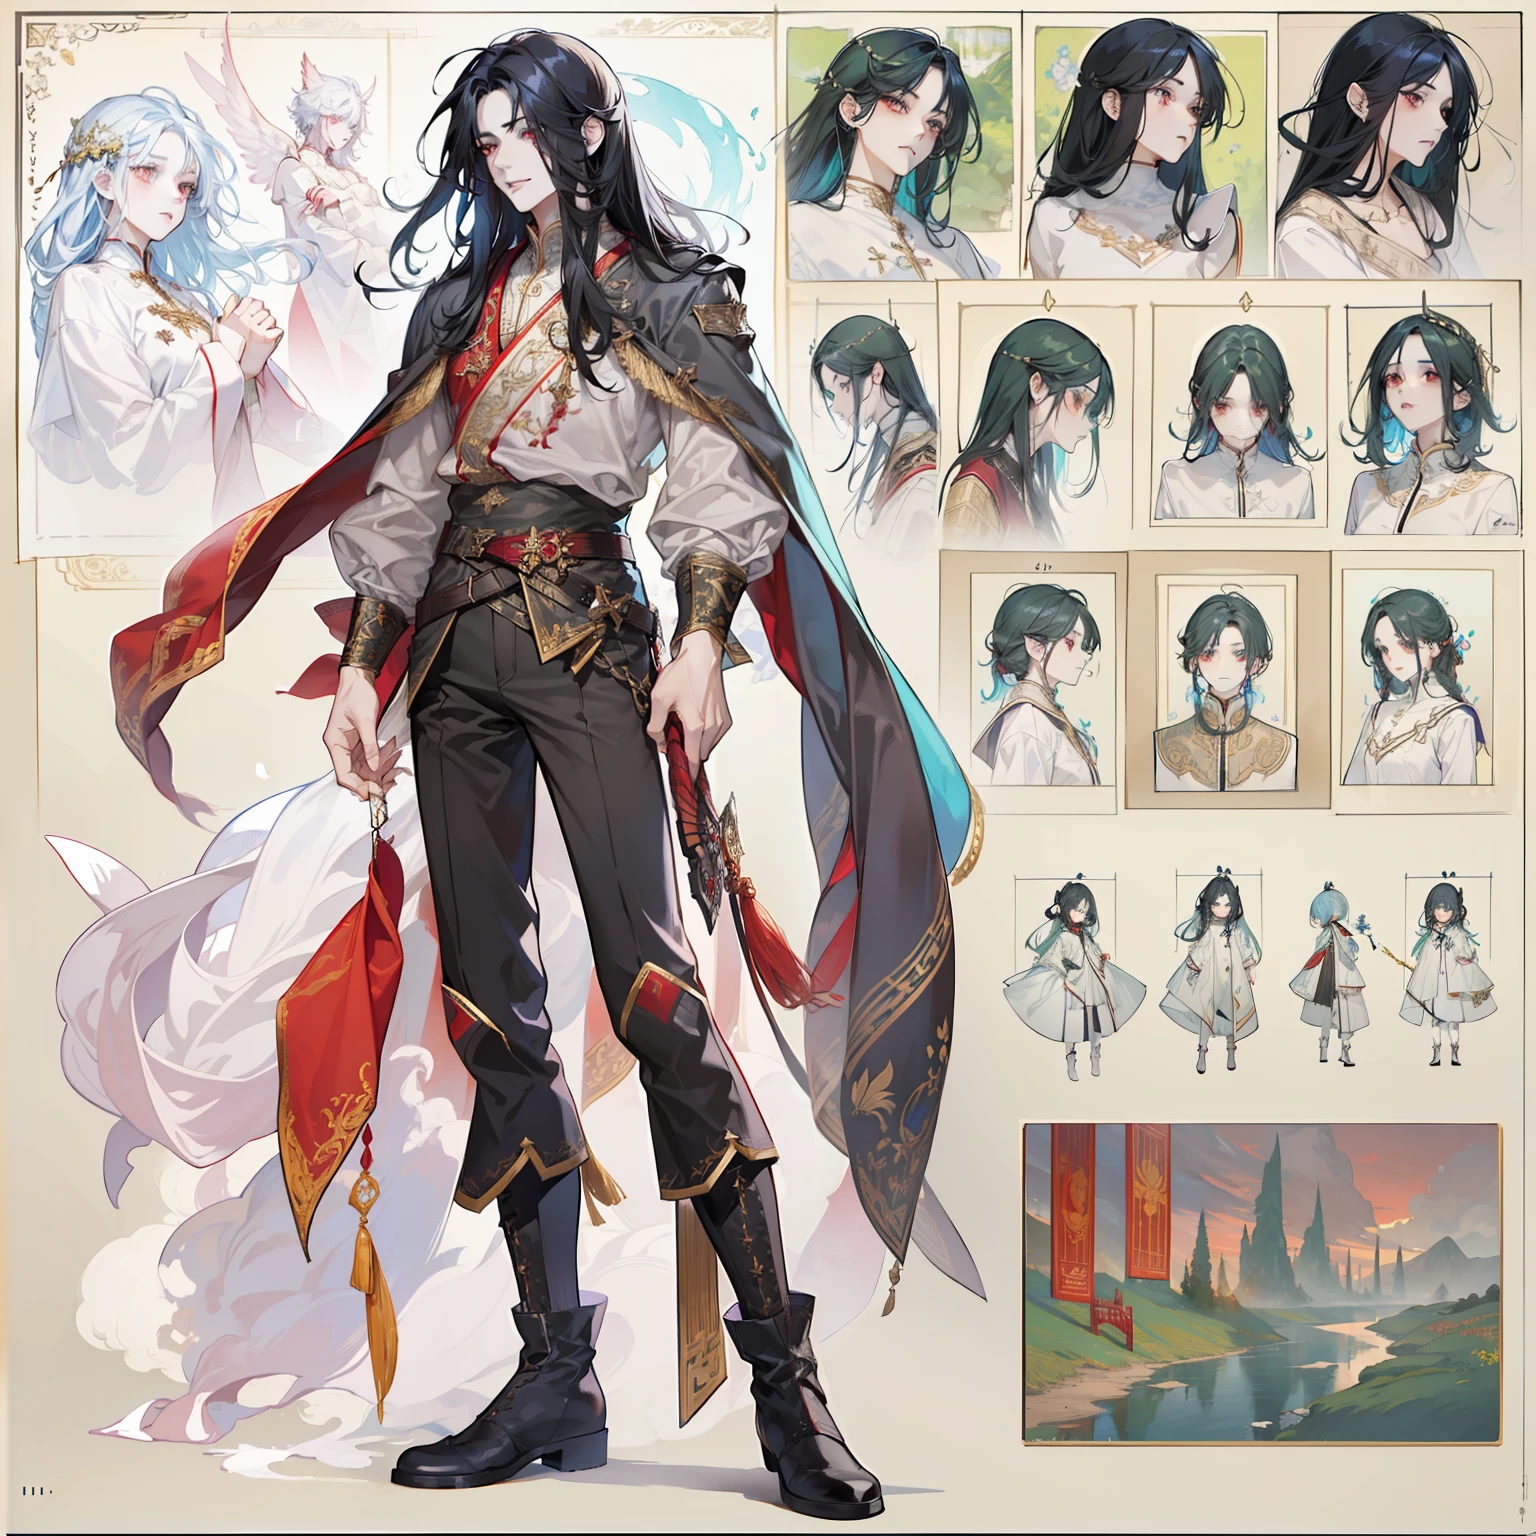 1 boy, solo, black hair, straight hair, flowing straight hair, red eyes, shirt, high boots, Lightweight clothing, Scandinavia theme, Scandinavian clothes, looking at viewer, fantasy art, beautiful painting, guwaika style, epic exquisite character art, stunning characters, man, lean (reference sheet:1.5)